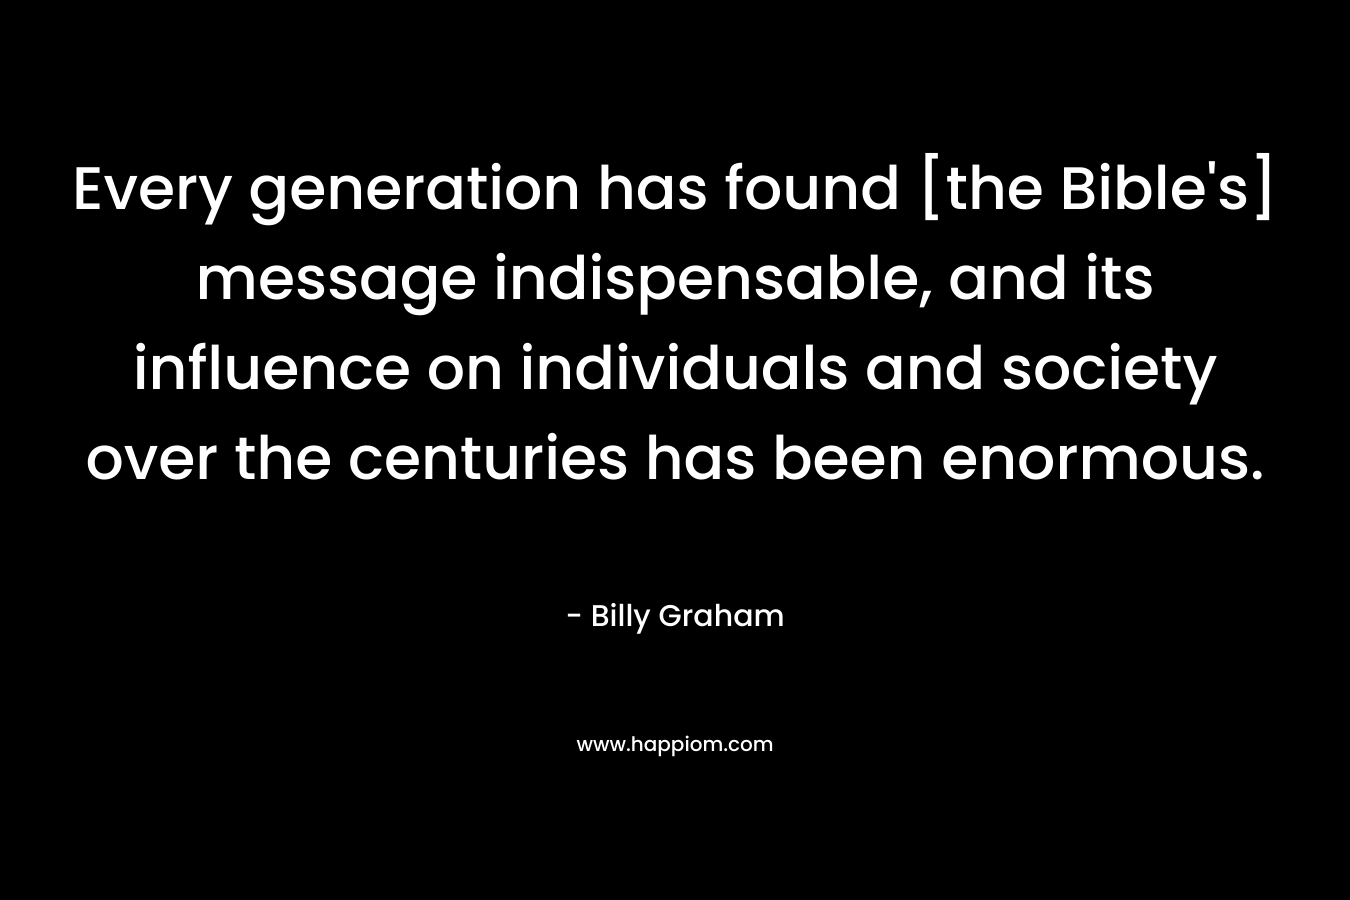 Every generation has found [the Bible's] message indispensable, and its influence on individuals and society over the centuries has been enormous.